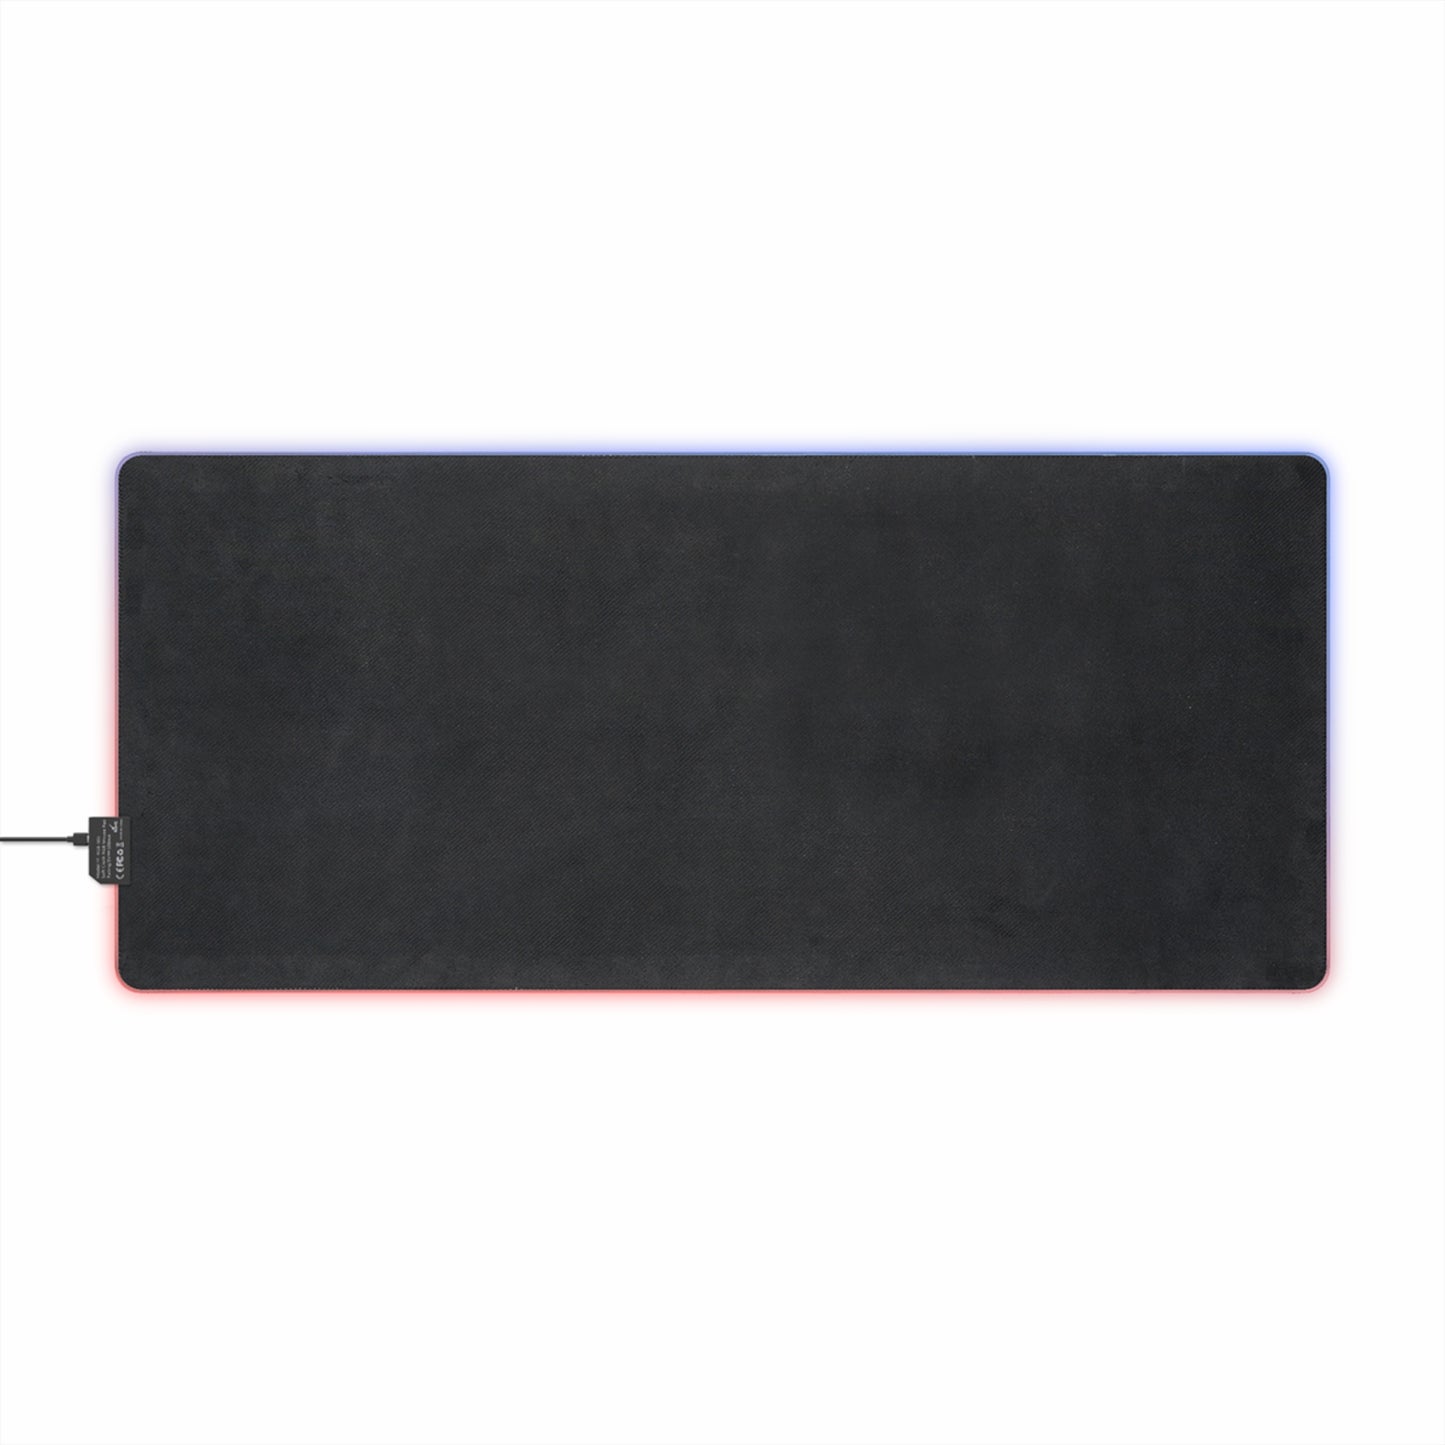 AG-6 LED Gaming Mouse Pad